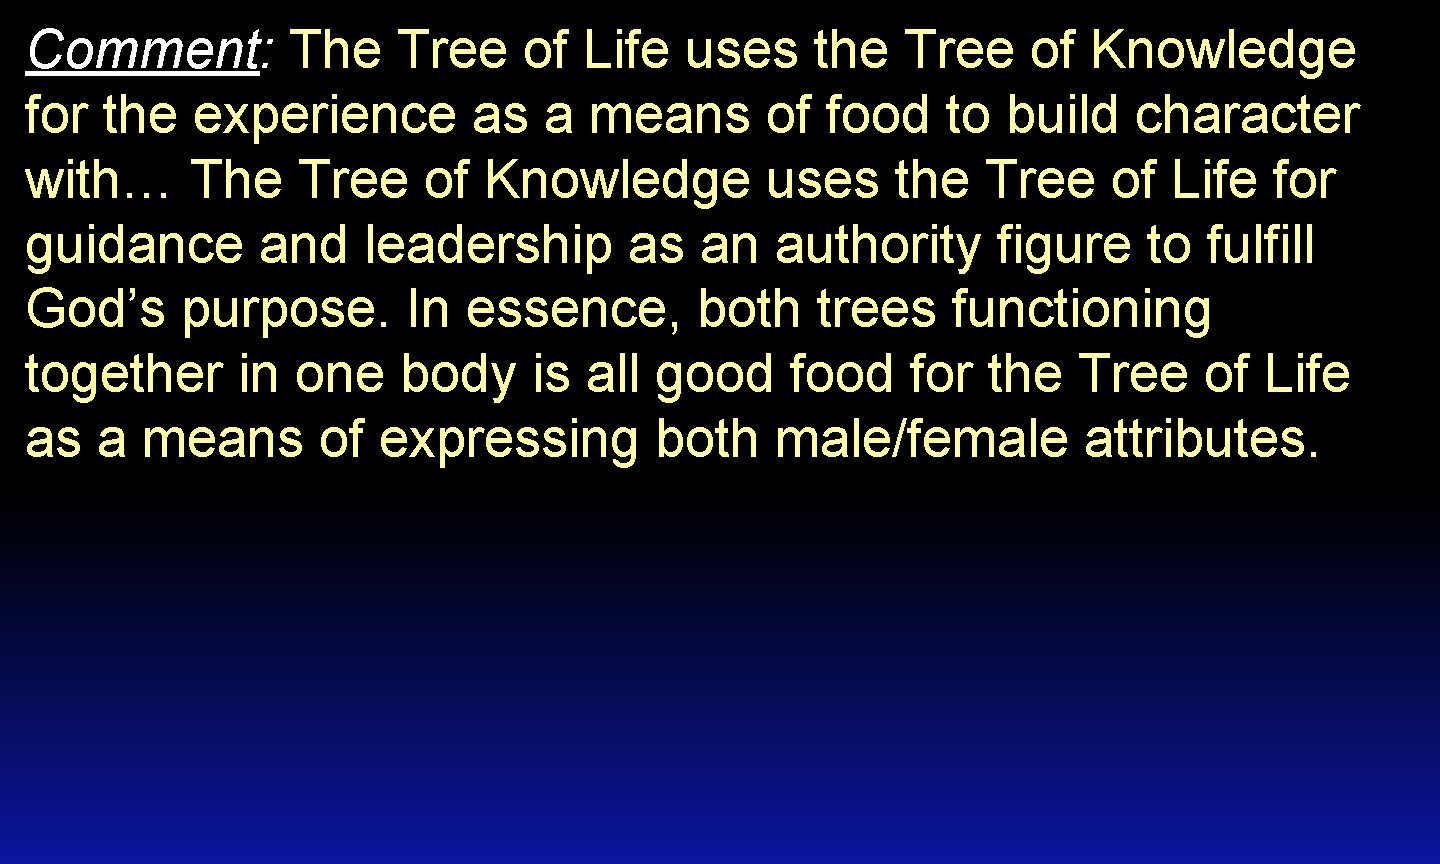 Comment: The Tree of Life uses the Tree of Knowledge for the experience as